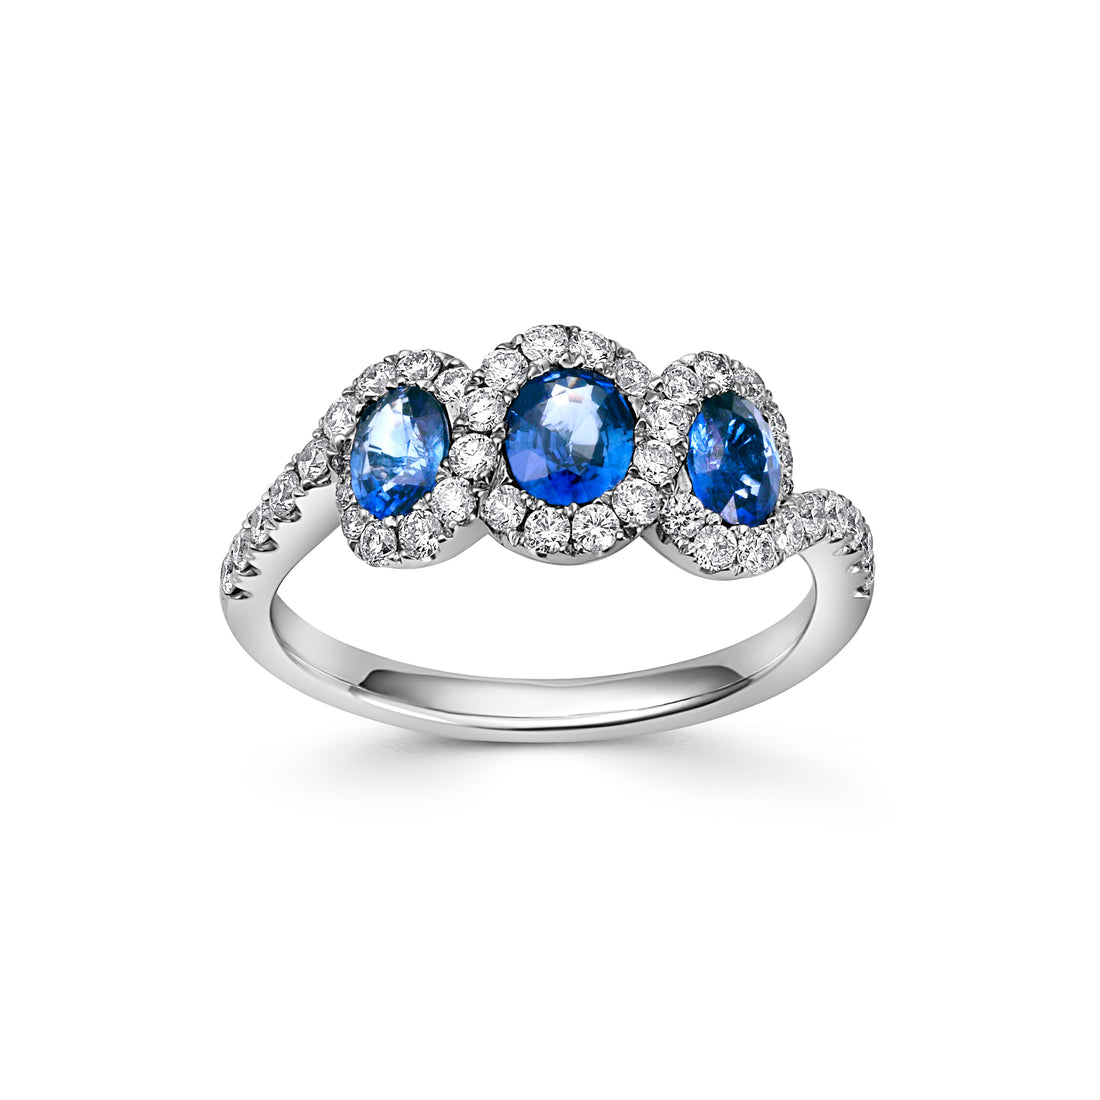 Triple Sapphire and Diamond Cluster Ring